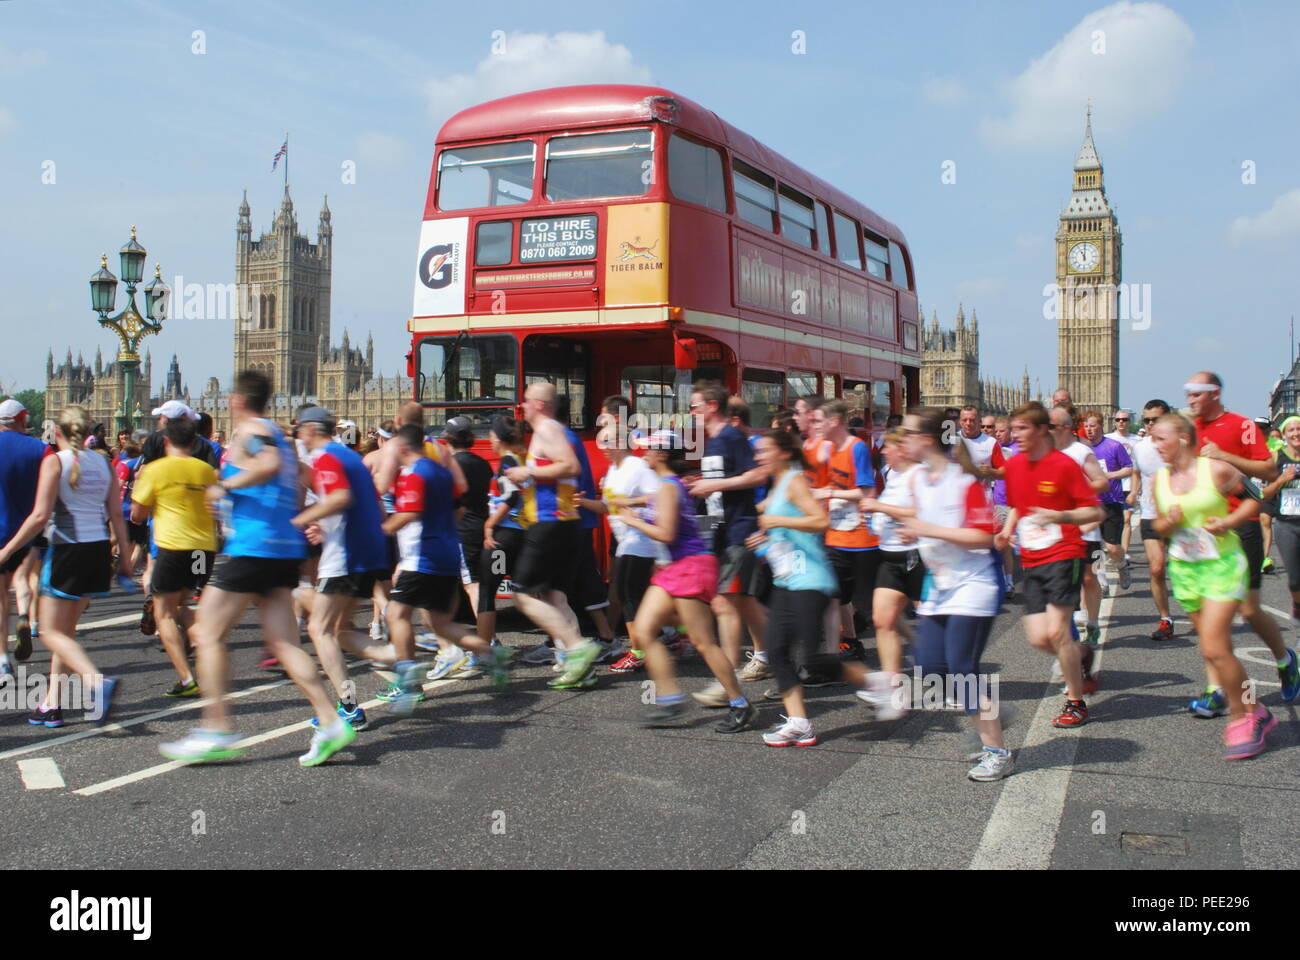 Runners passing red double-decker bus near Big Ben and Palace of Westminster in London Stock Photo